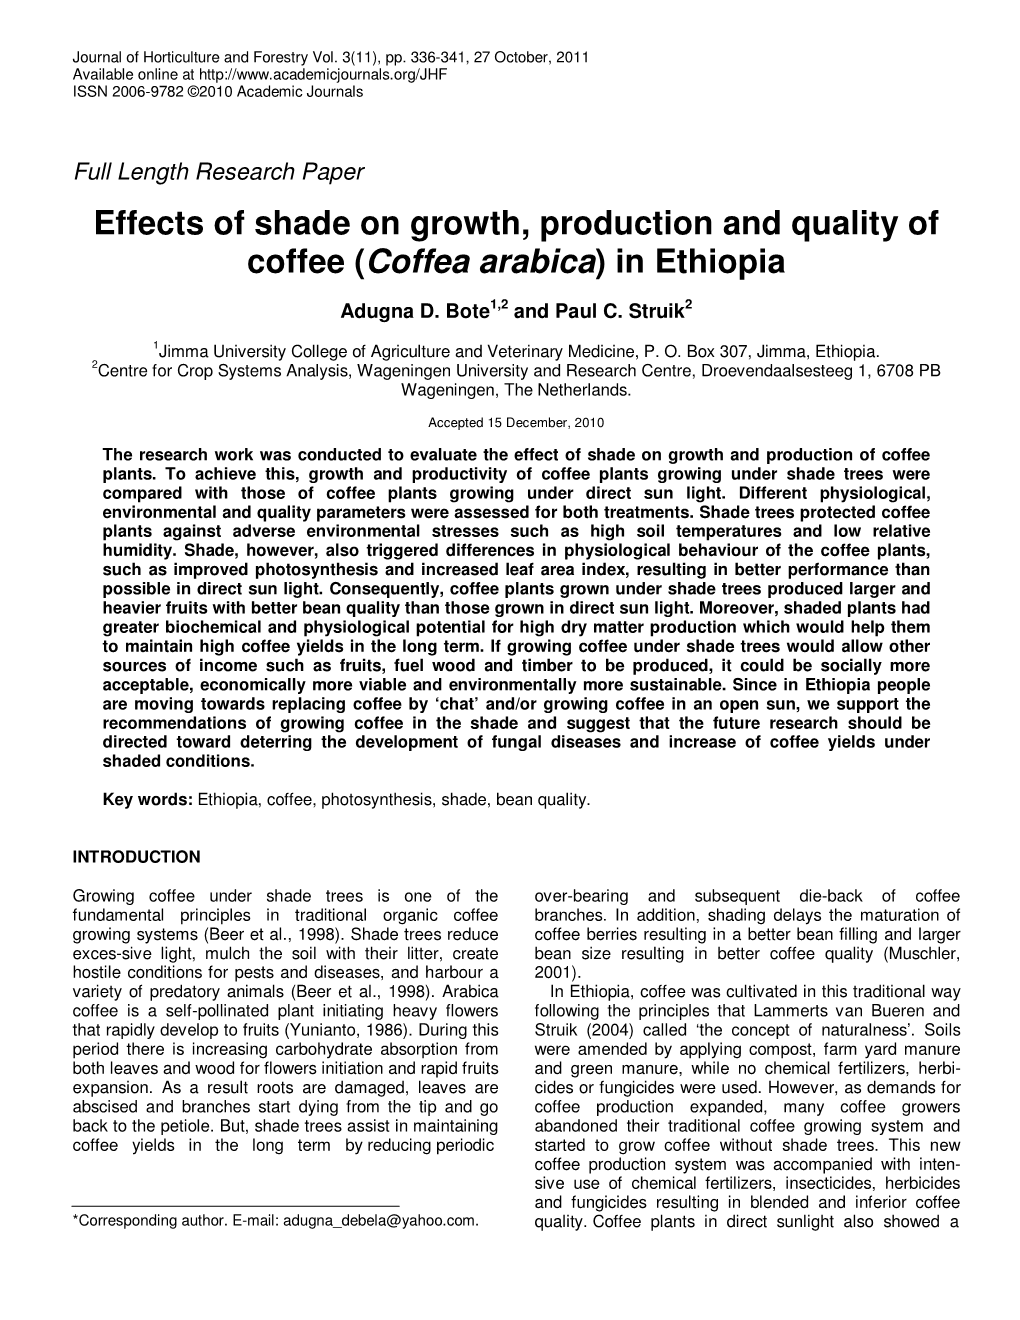 Effects of Shade on Growth, Production and Quality of Coffee (Coffea Arabica)